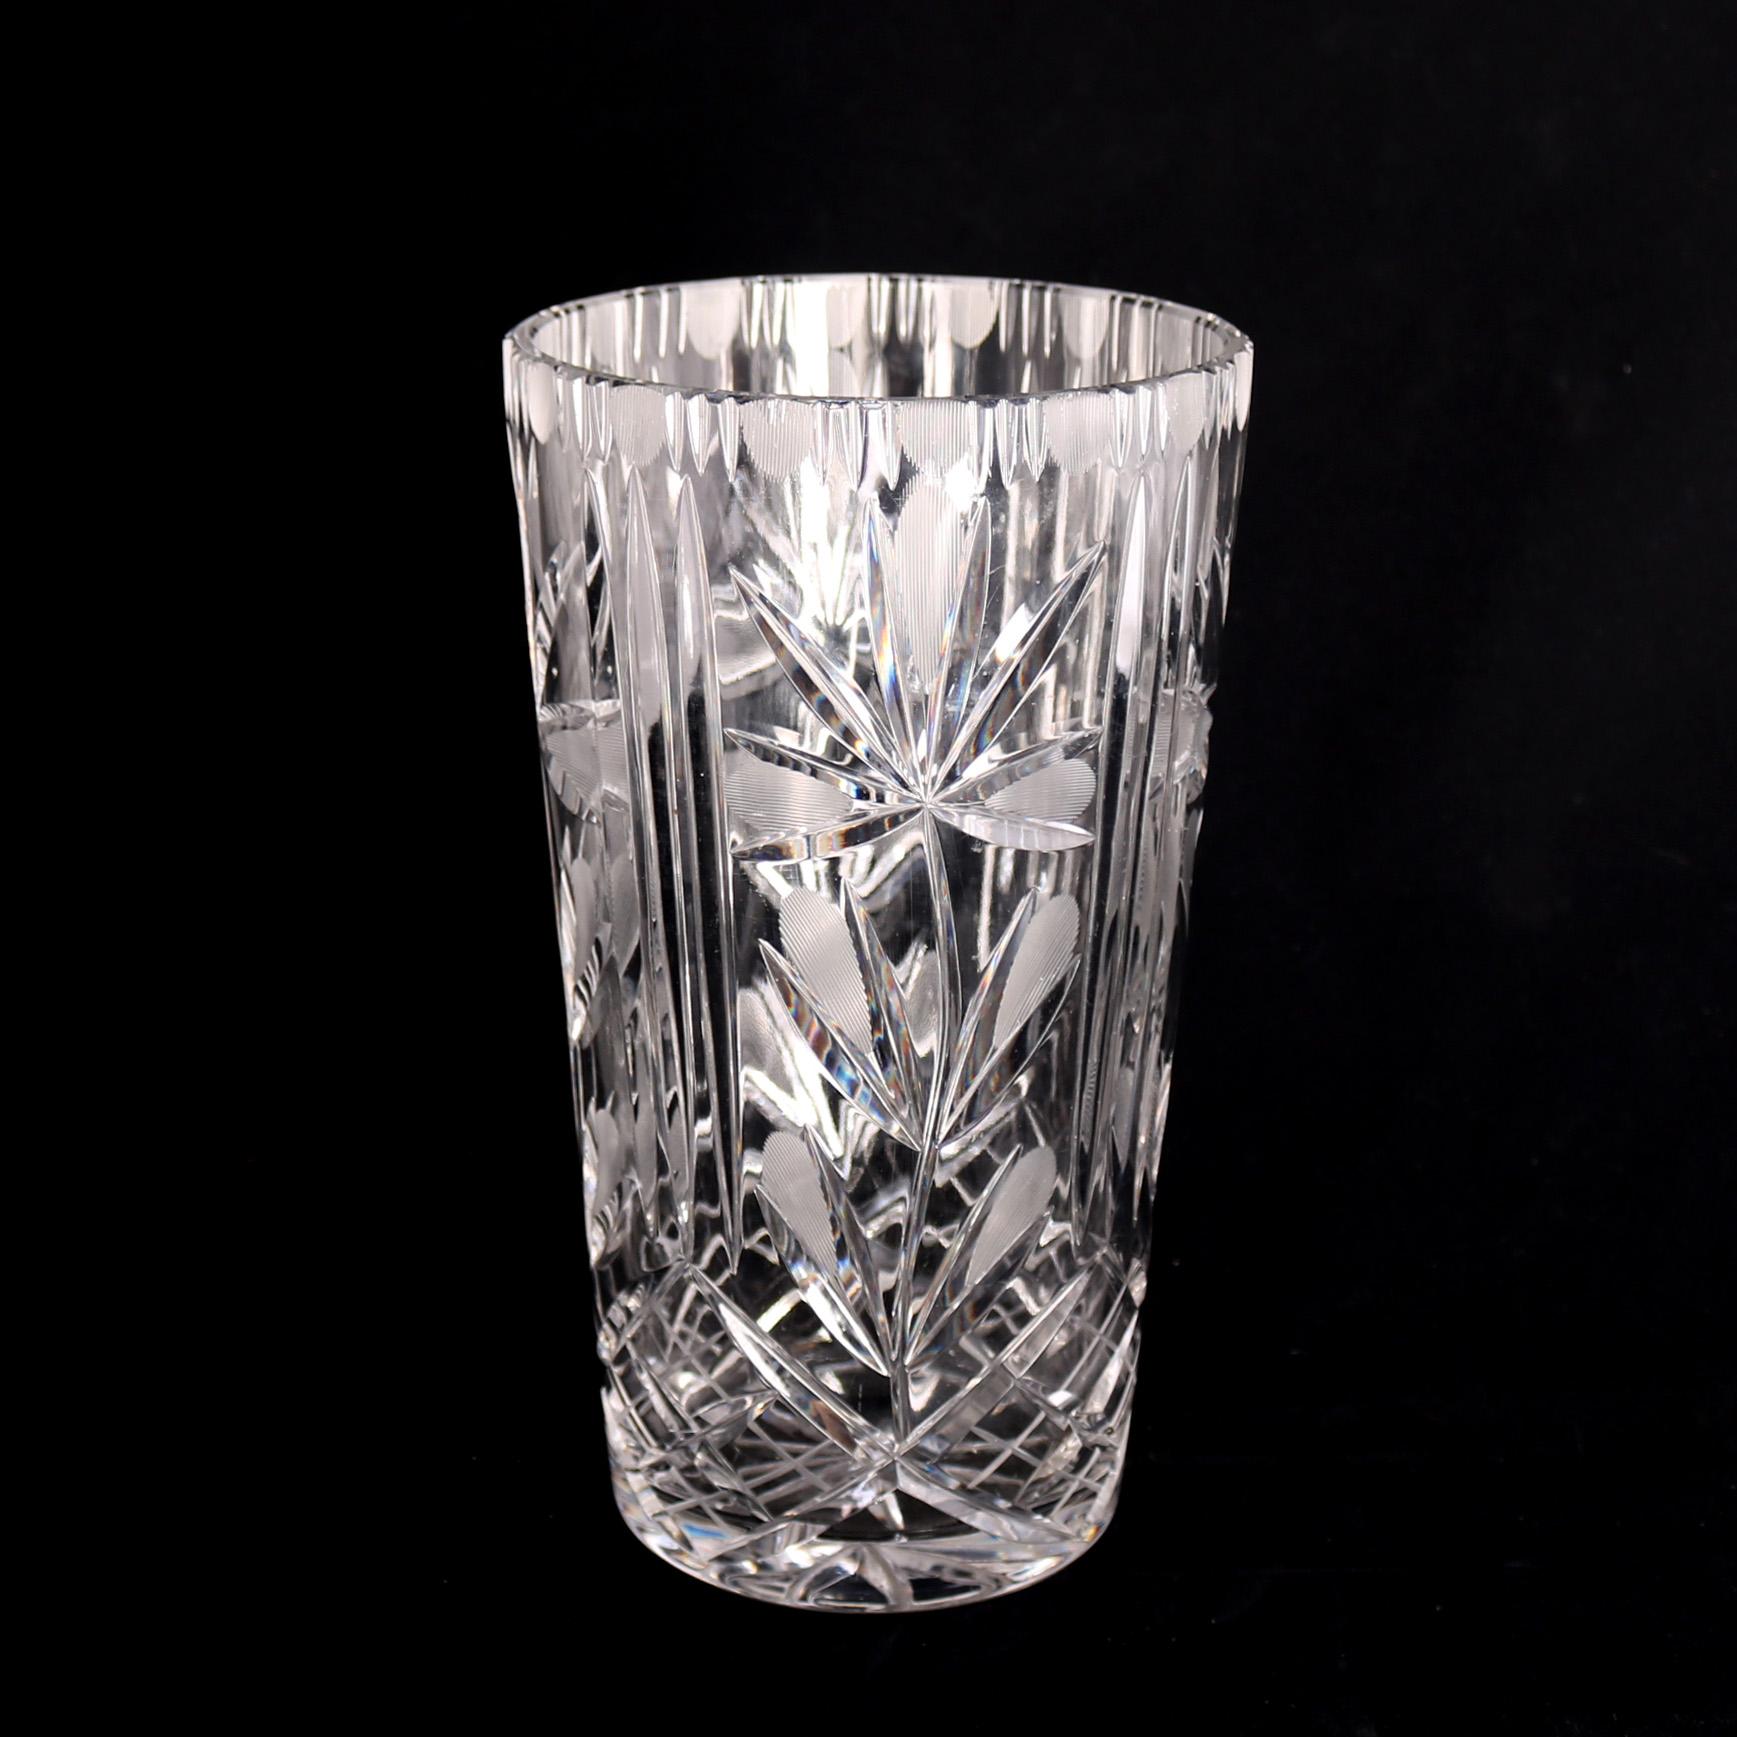 A vintage French cut crystal vase offer slightly flared form with floral, star and foliate design in the manner of Lalique, 20th century

Measures: 10.5